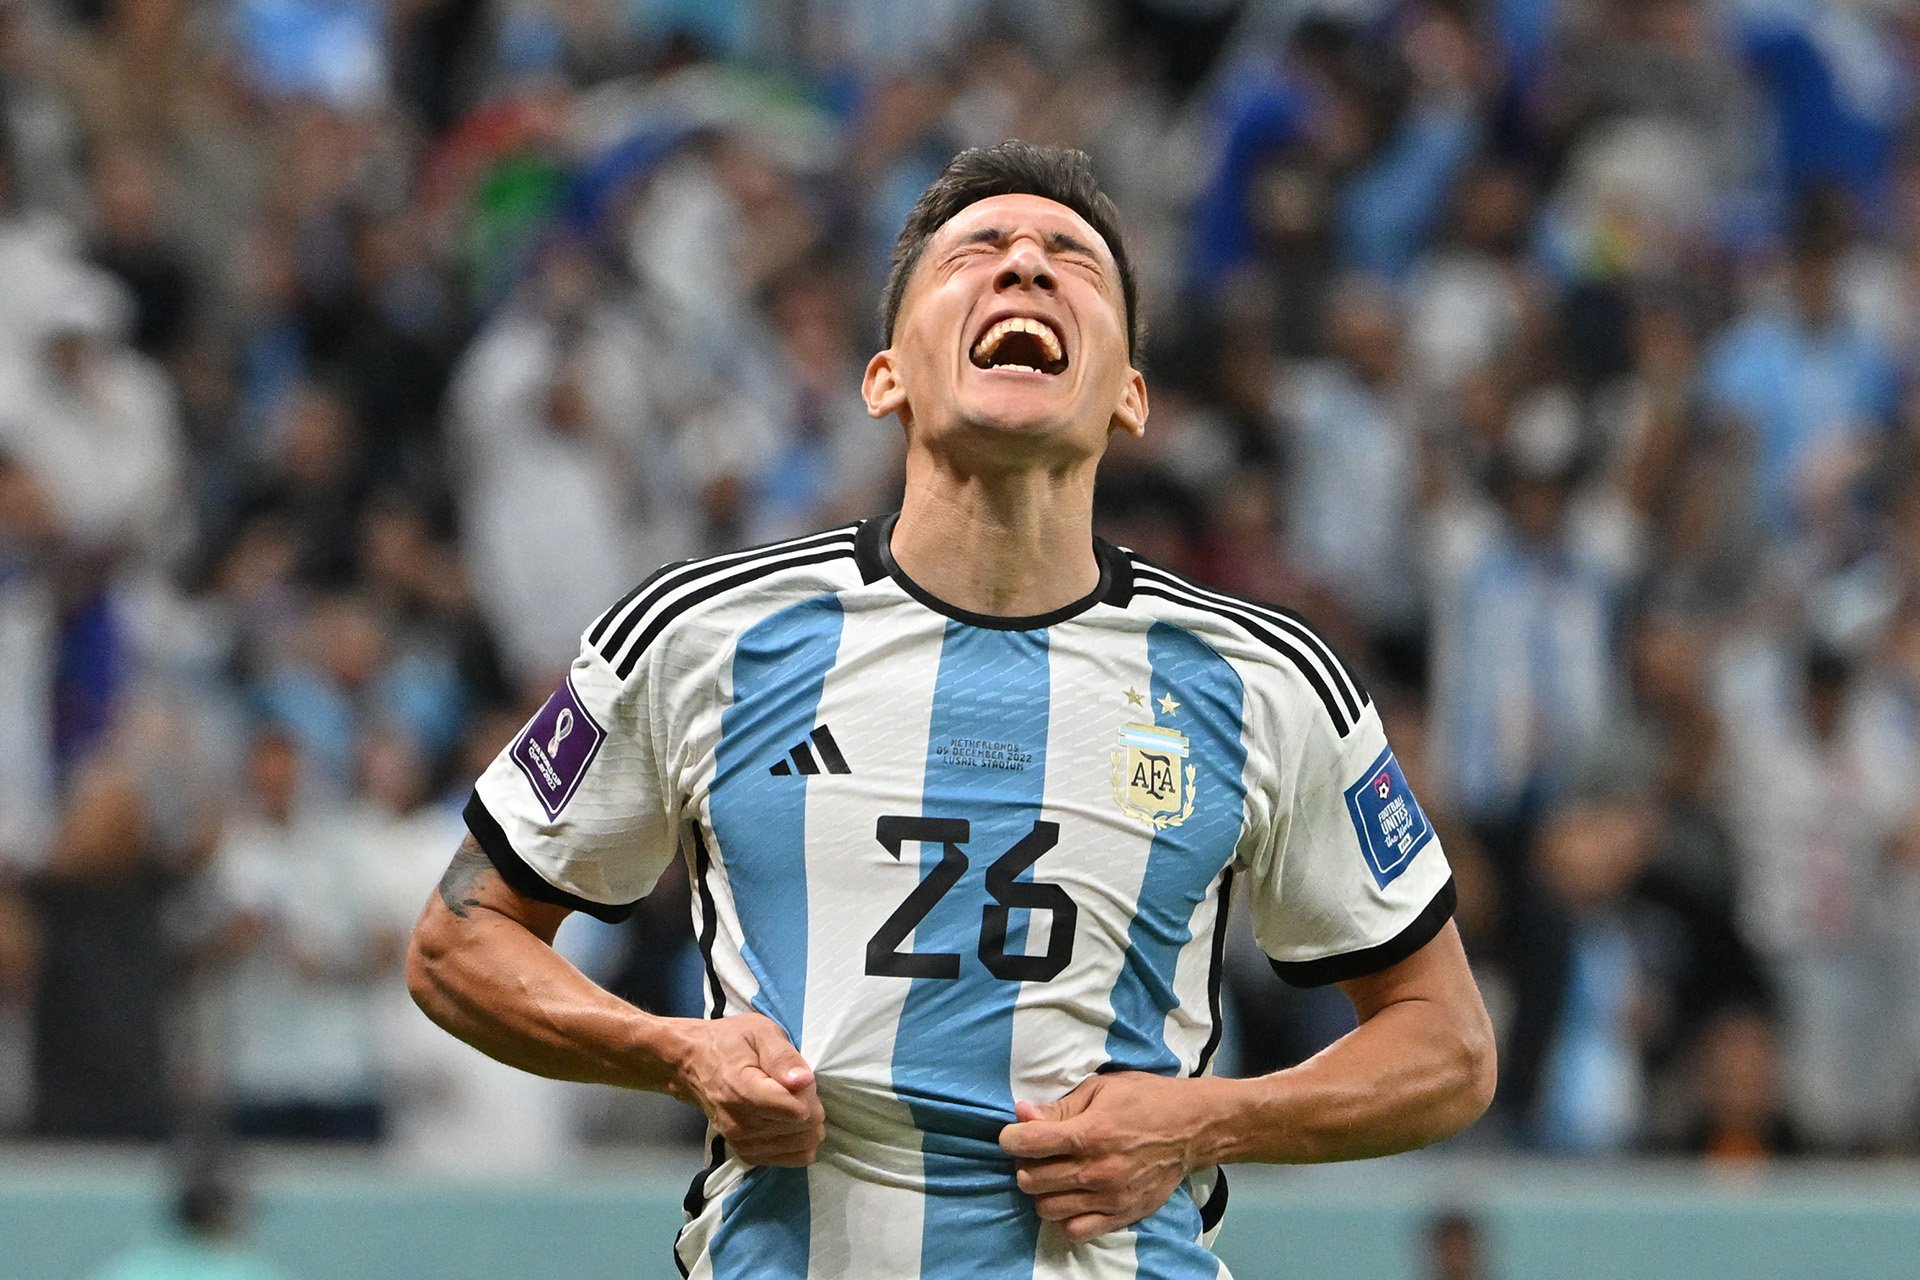 Argentina's defender #26 Nahuel Molina celebrates scoring his team's first goal during the Qatar 2022 World Cup quarter-final football match between Netherlands and Argentina at Lusail Stadium, north of Doha, on December 9, 2022. (Photo by Alberto PIZZOLI / AFP)